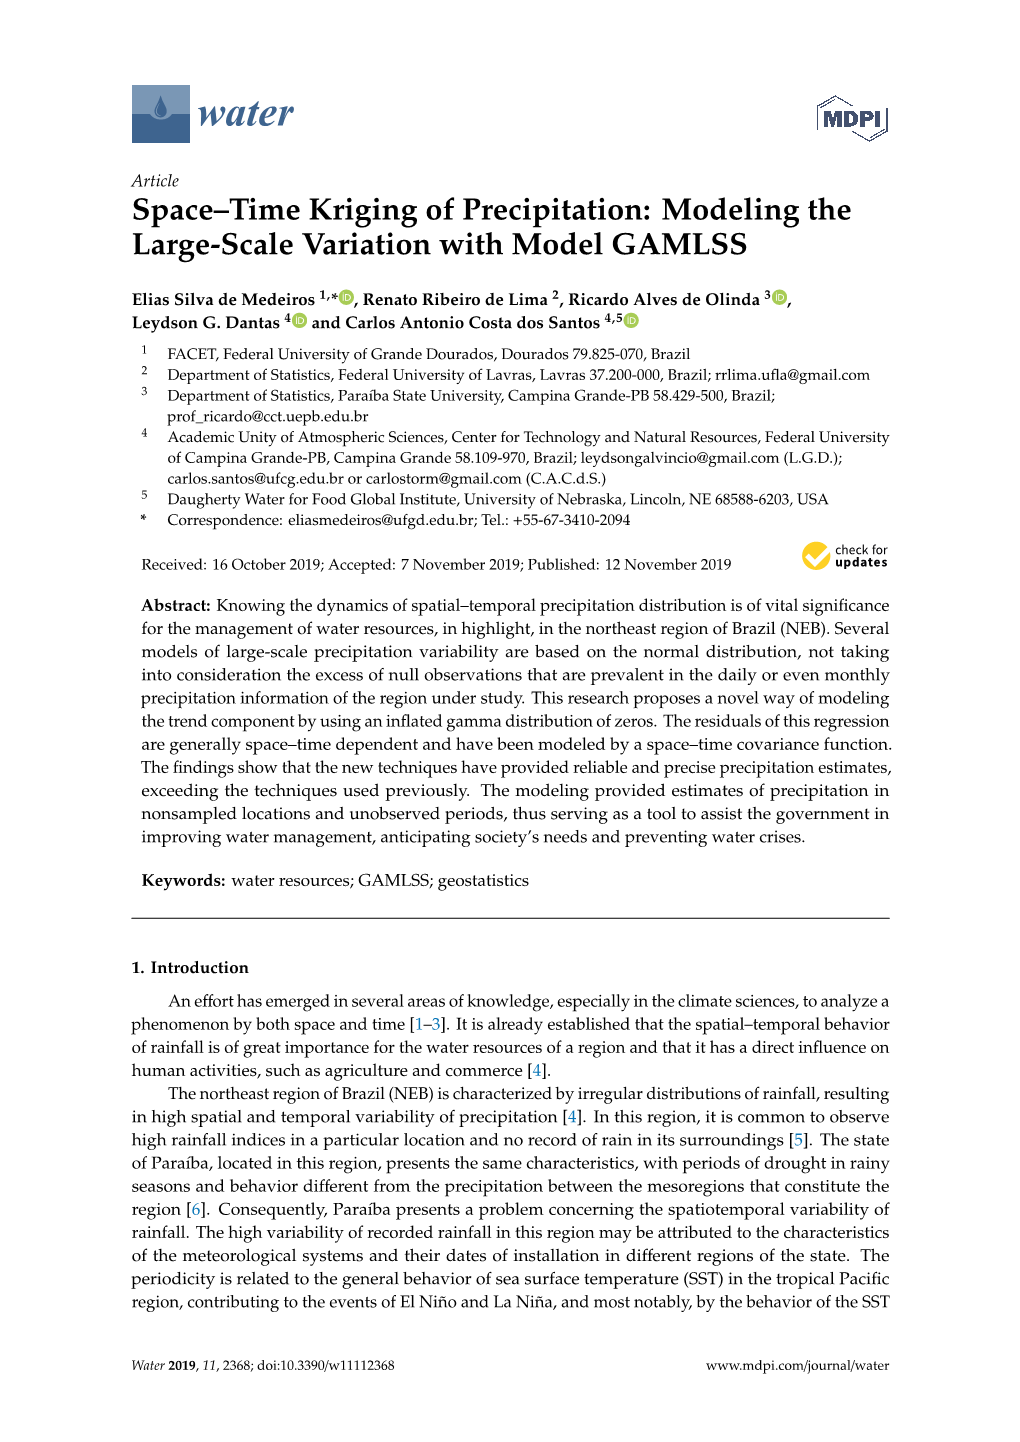 Space–Time Kriging of Precipitation: Modeling the Large-Scale Variation with Model GAMLSS